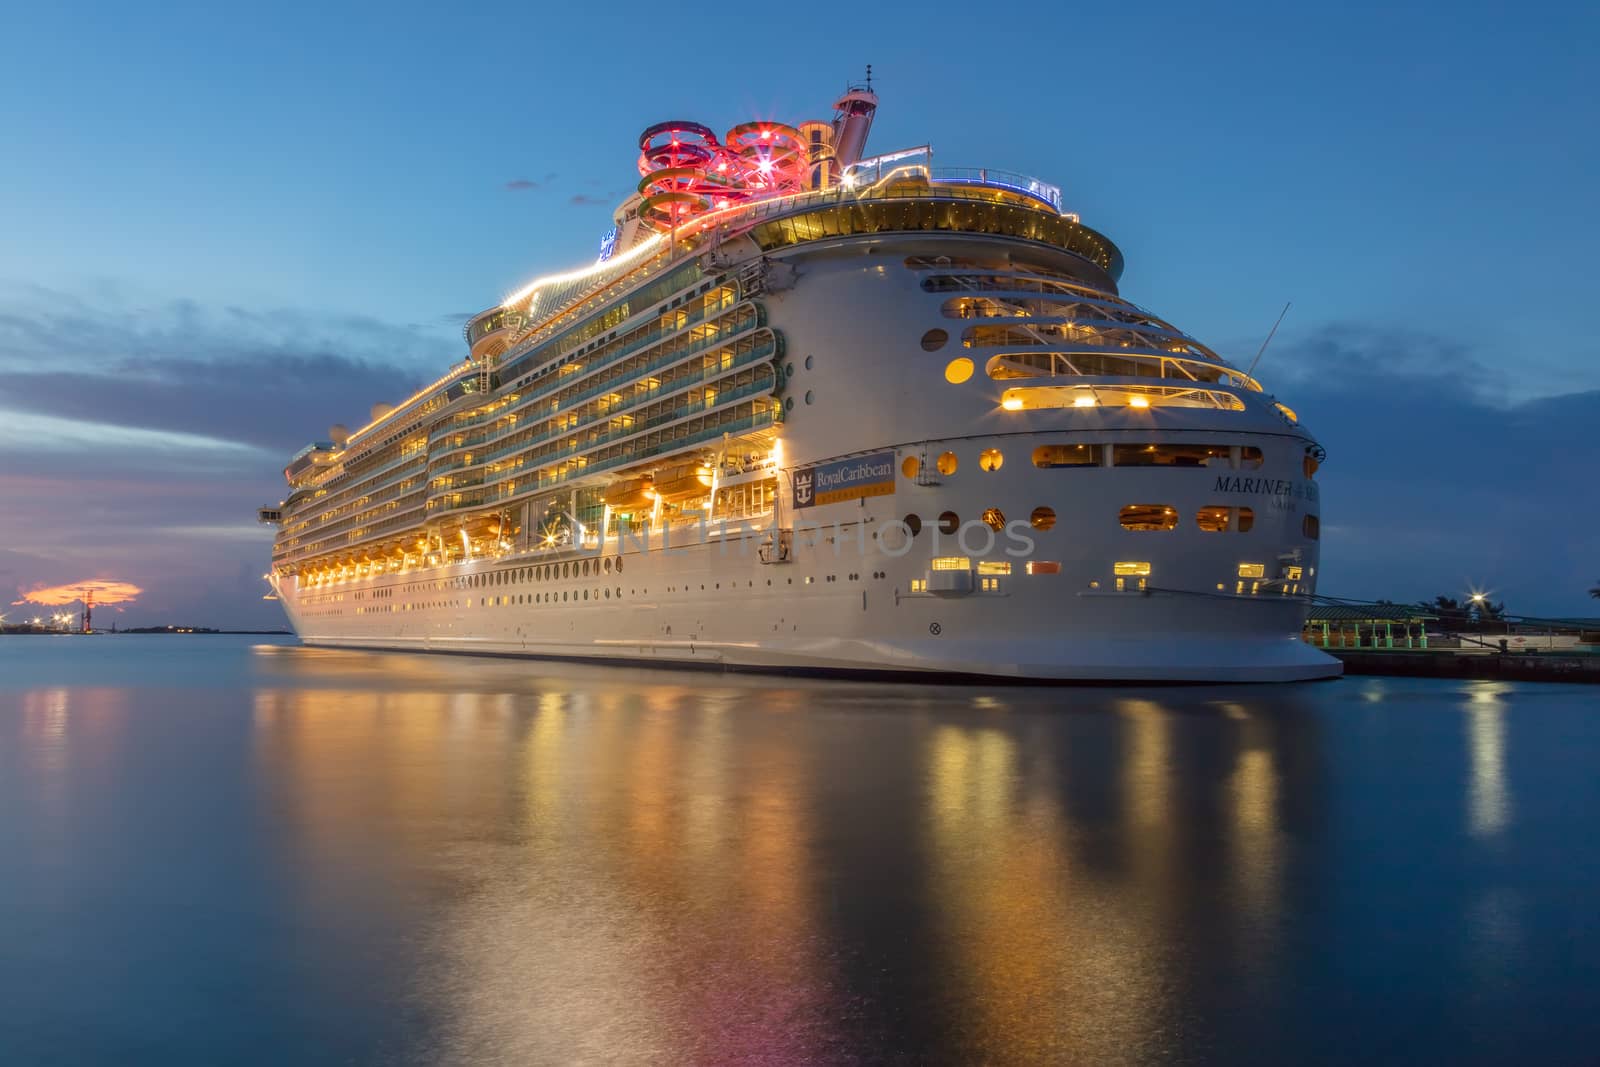 Nassau, Bahamas - August 24, 2019: Beautiful blue hour shot of Royal Caribbean's Mariner of the Seas docked in the port of Nassau. Amazing colors and reflections in the water. Long exposure shot.